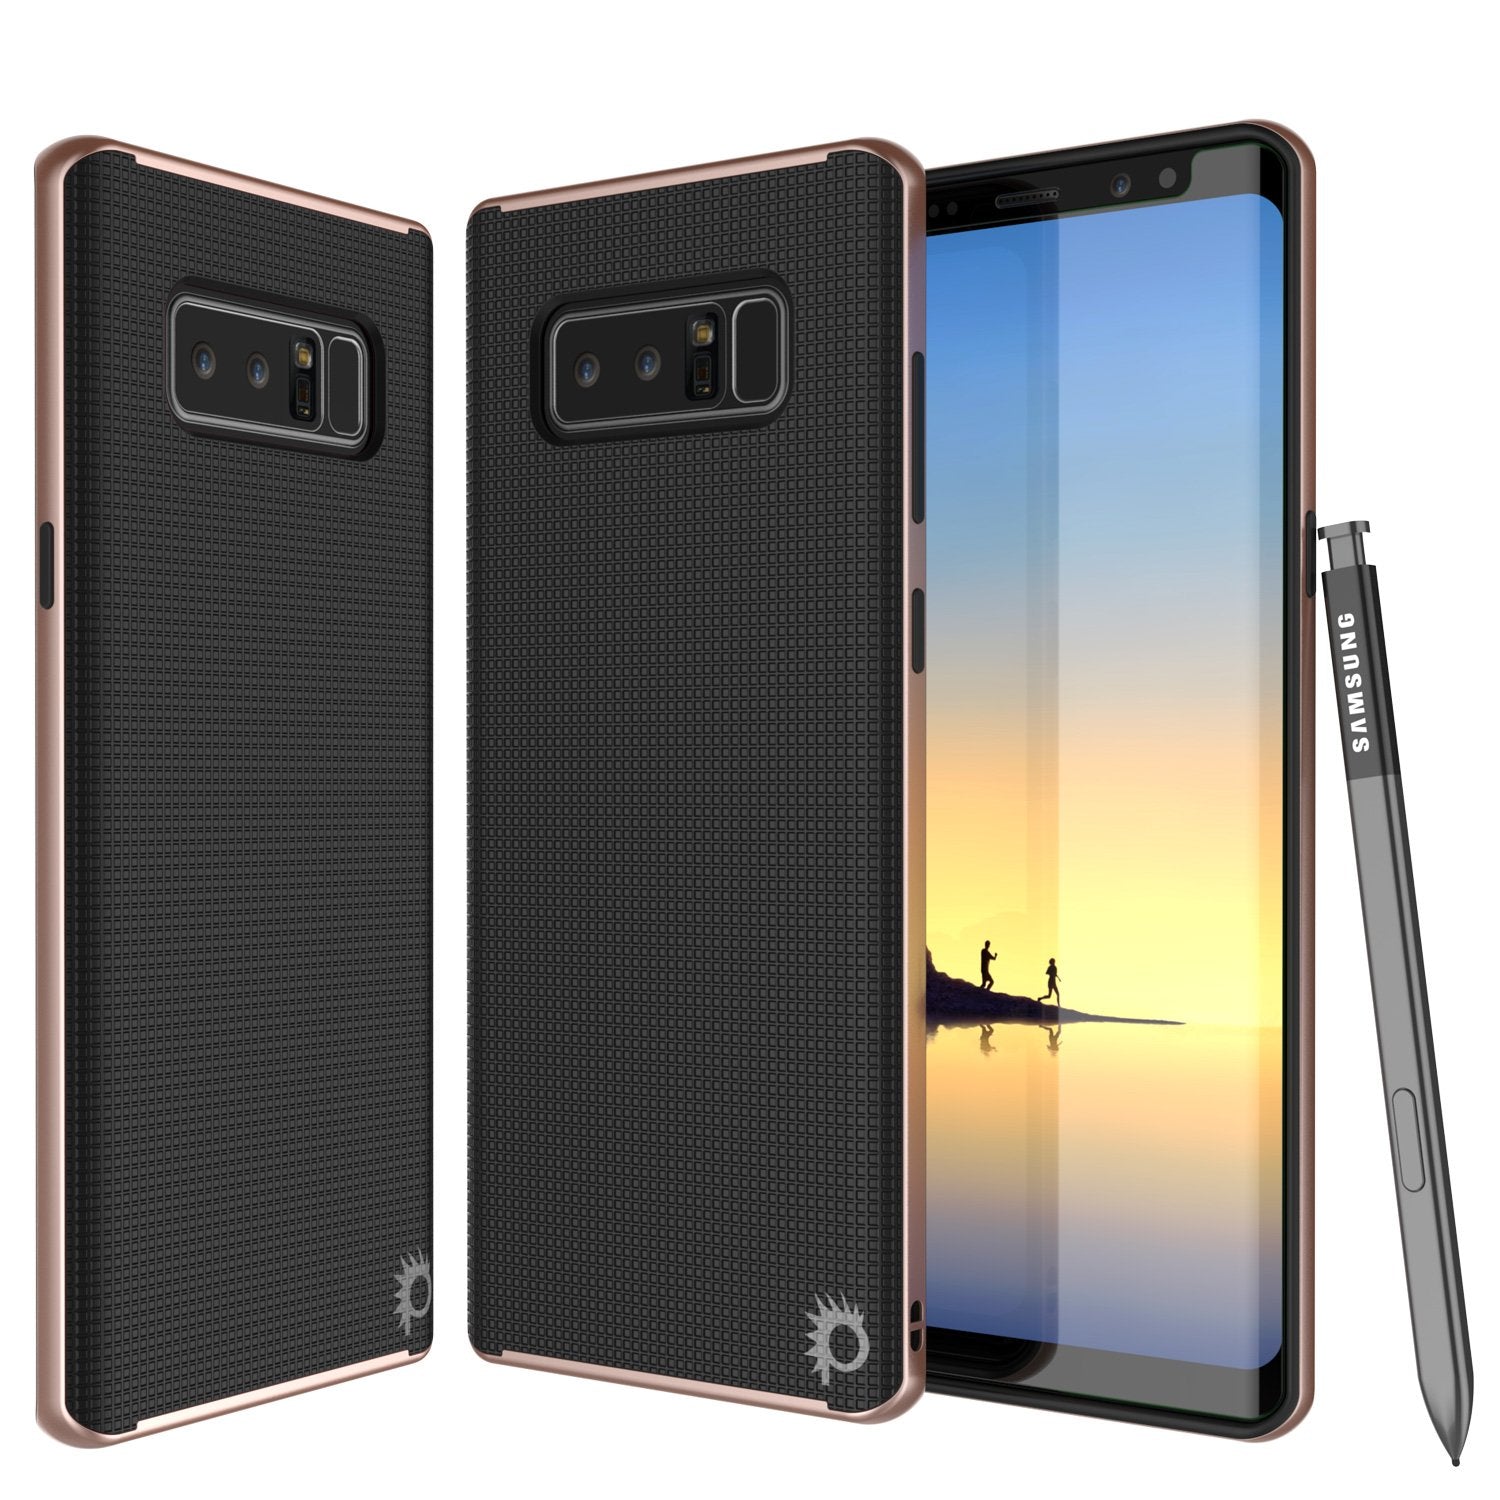 Galaxy Note 8 Case, PunkCase [Stealth Series] Hybrid 3-Piece Shockproof Dual Layer Cover [Non-Slip] [Soft TPU + PC Bumper] with PUNKSHIELD Screen Protector for Samsung Note 8 [Rose Gold]